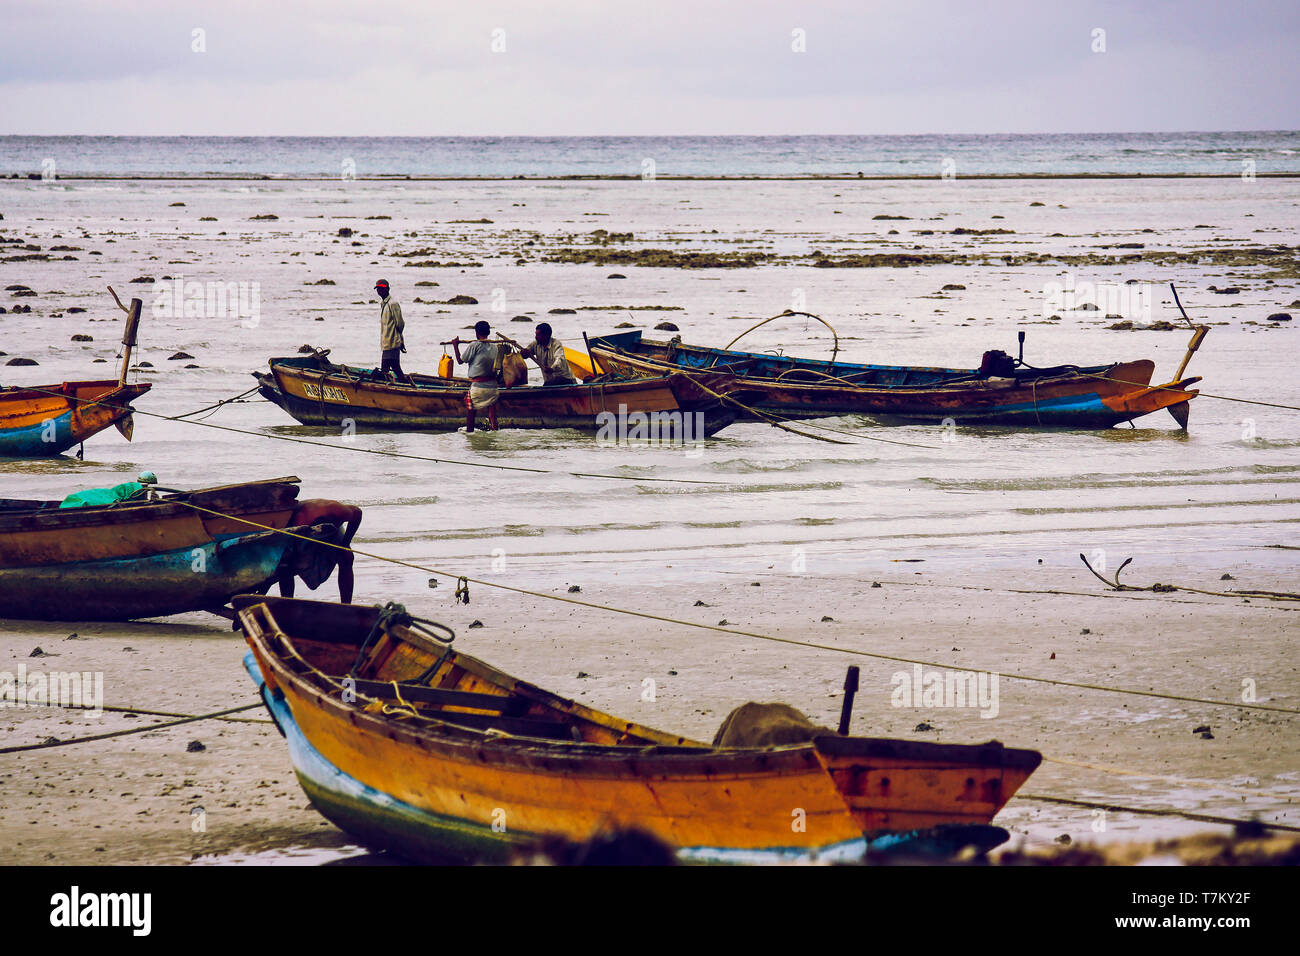 Indian Fishermen On The Beach With Their Boats At Havelock Island